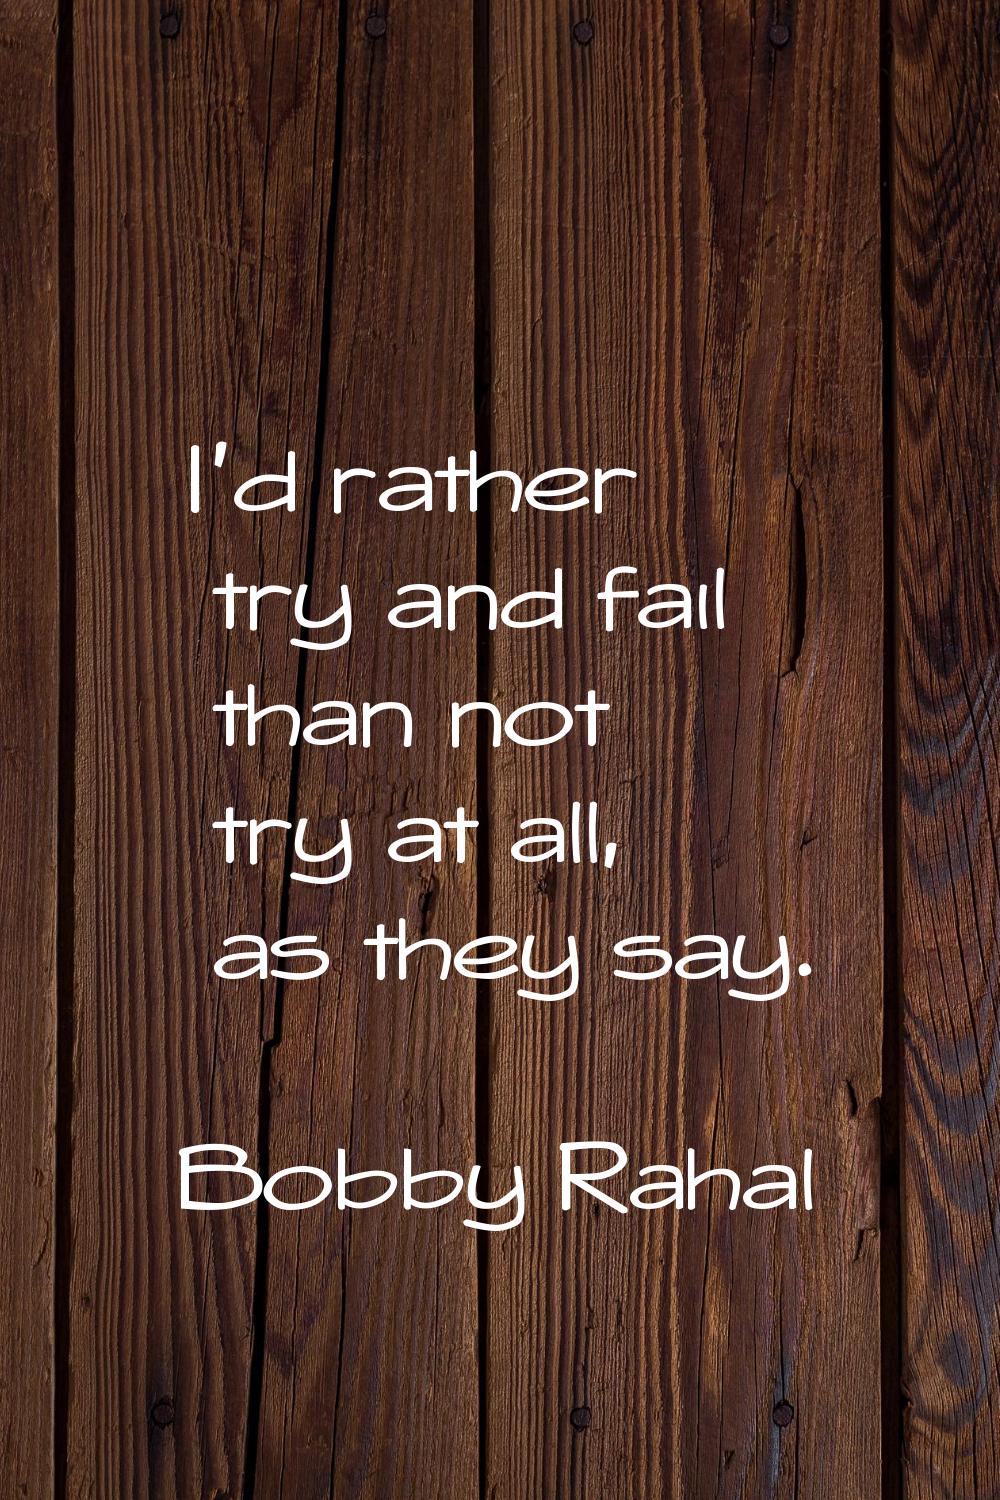 I'd rather try and fail than not try at all, as they say.